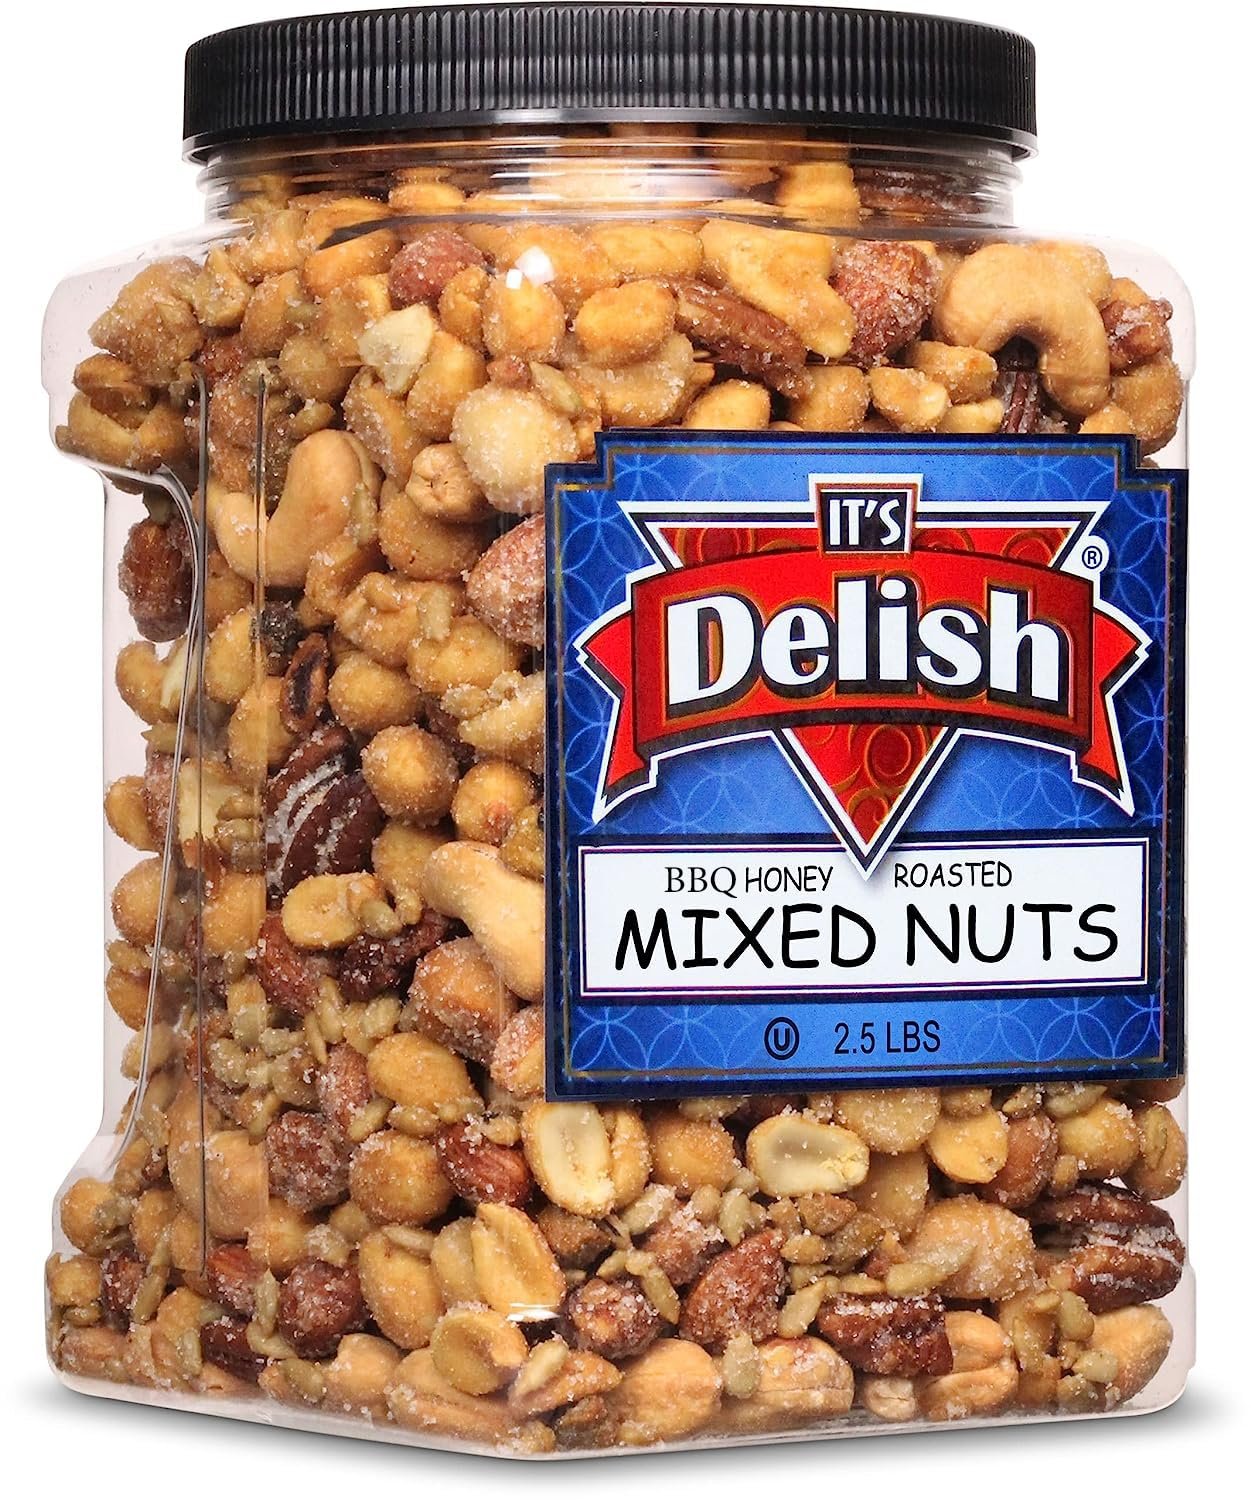 BBQ Honey Roasted Mixed Nuts, 2.5 LBS Jumbo Container